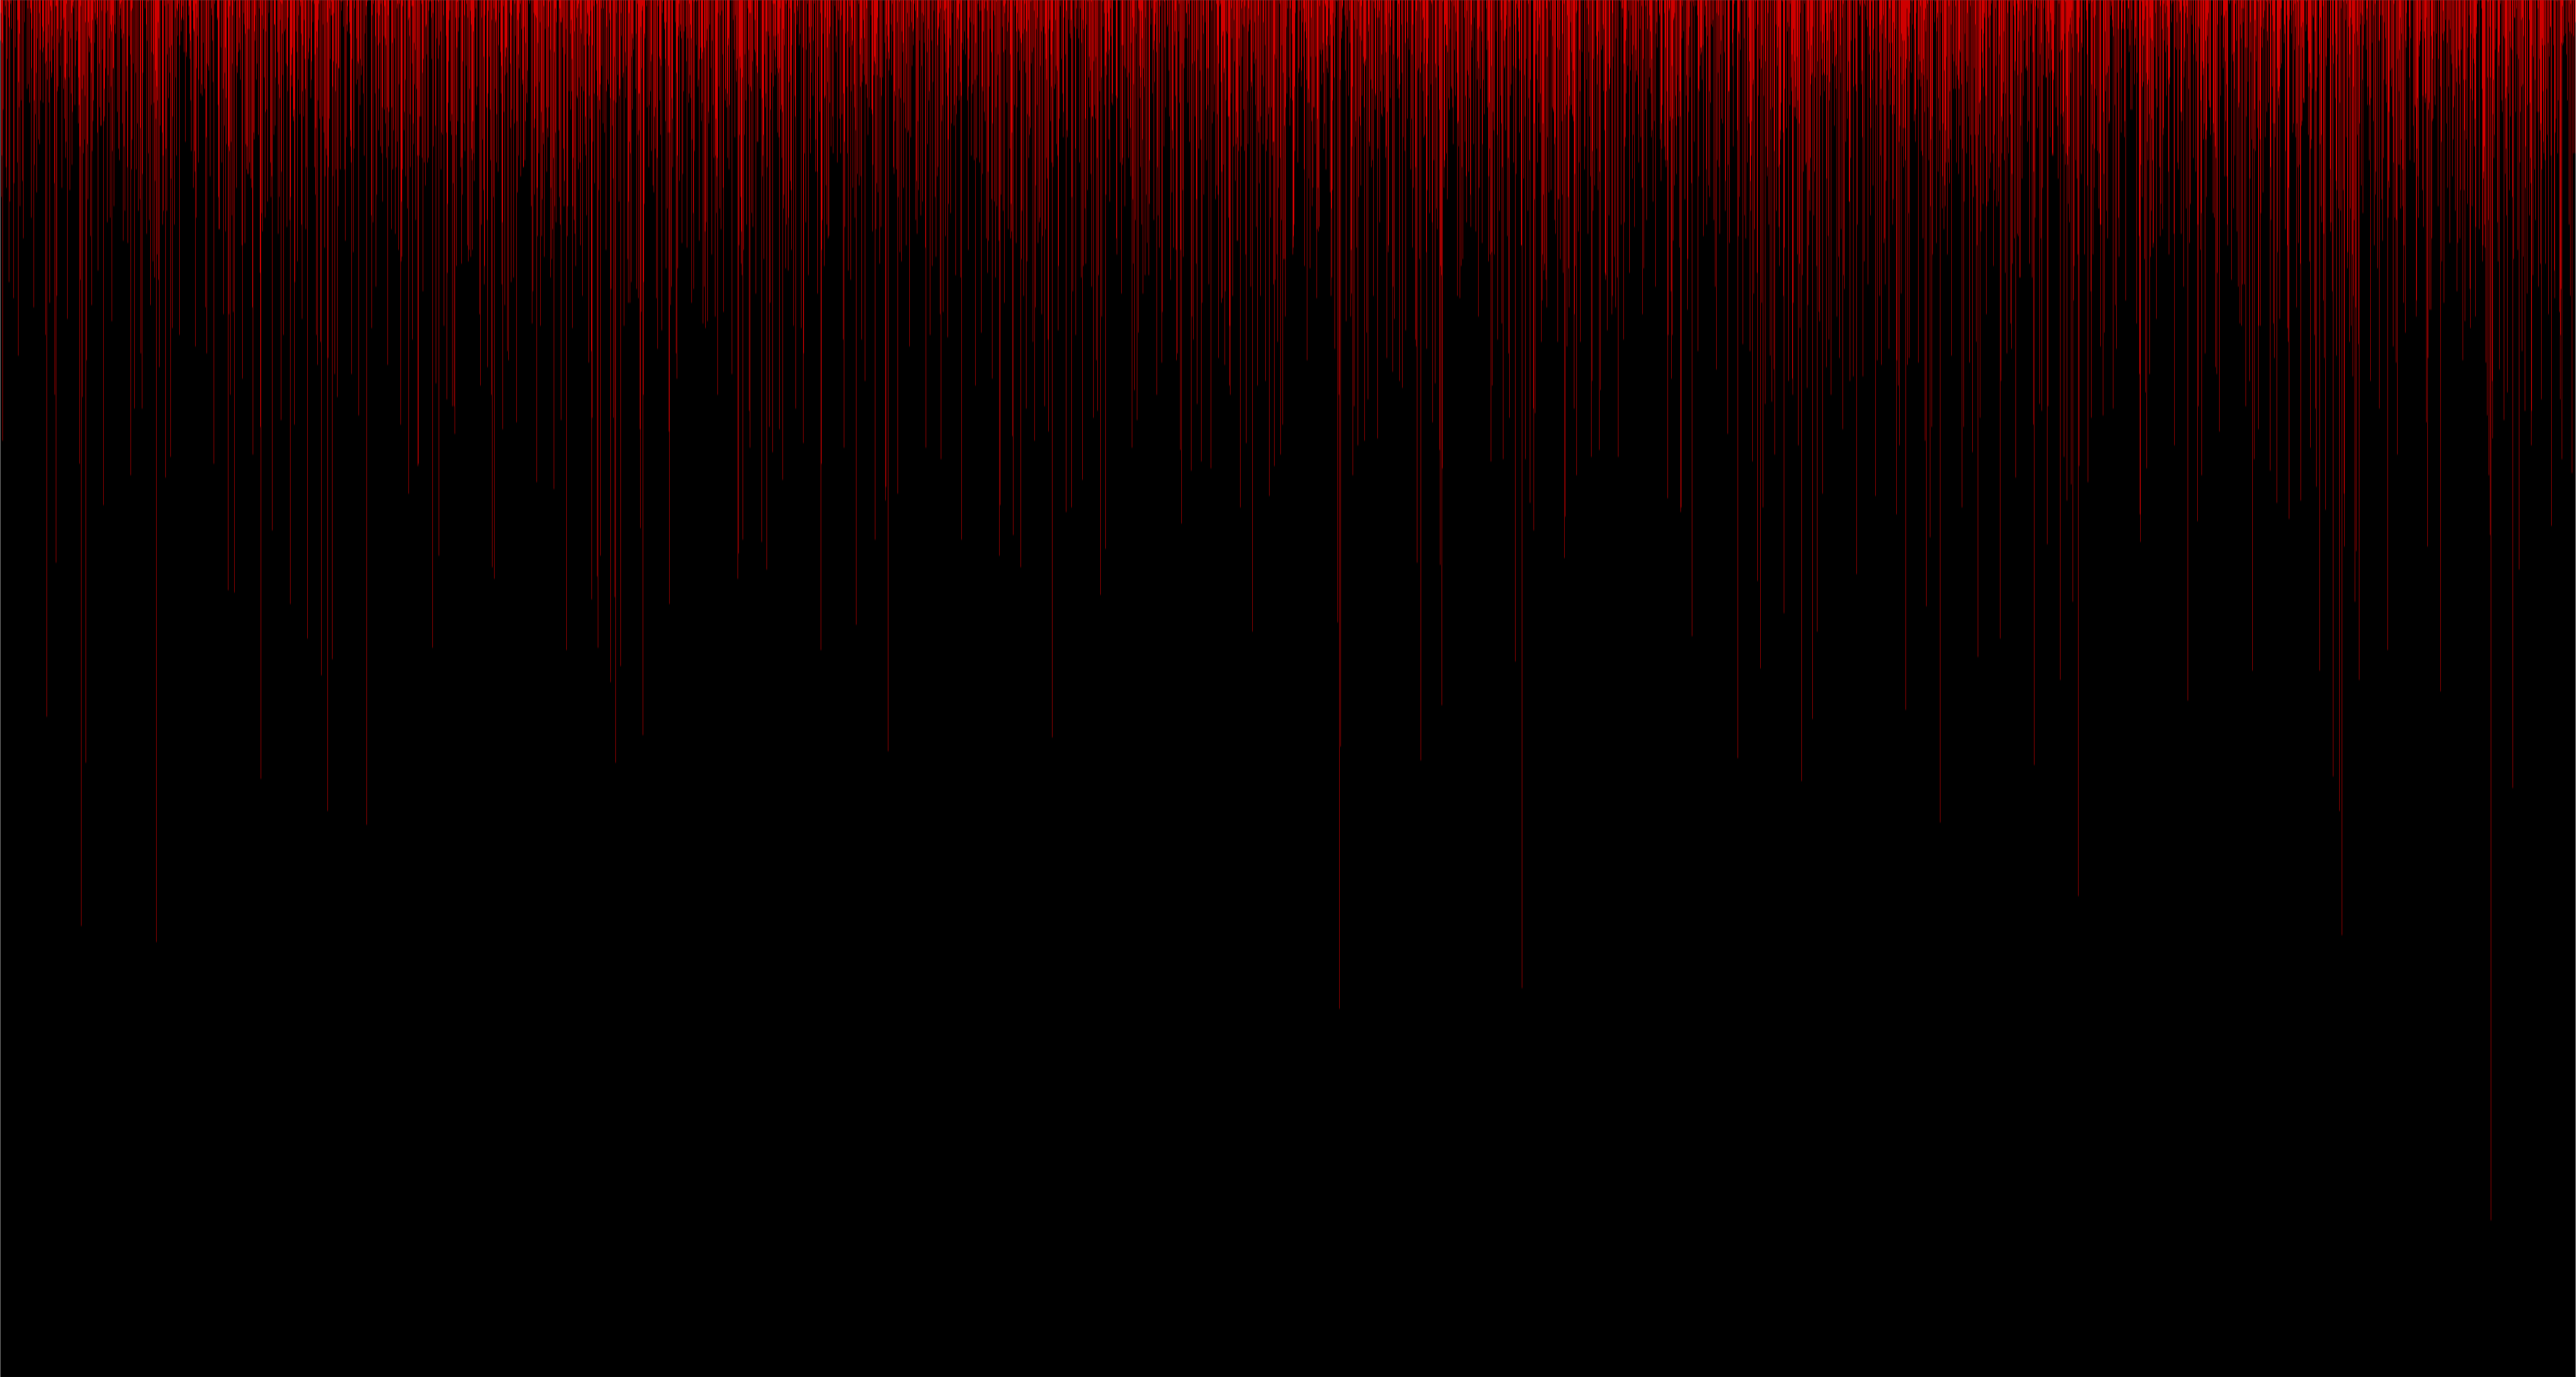 Blood staines on a black background free image download